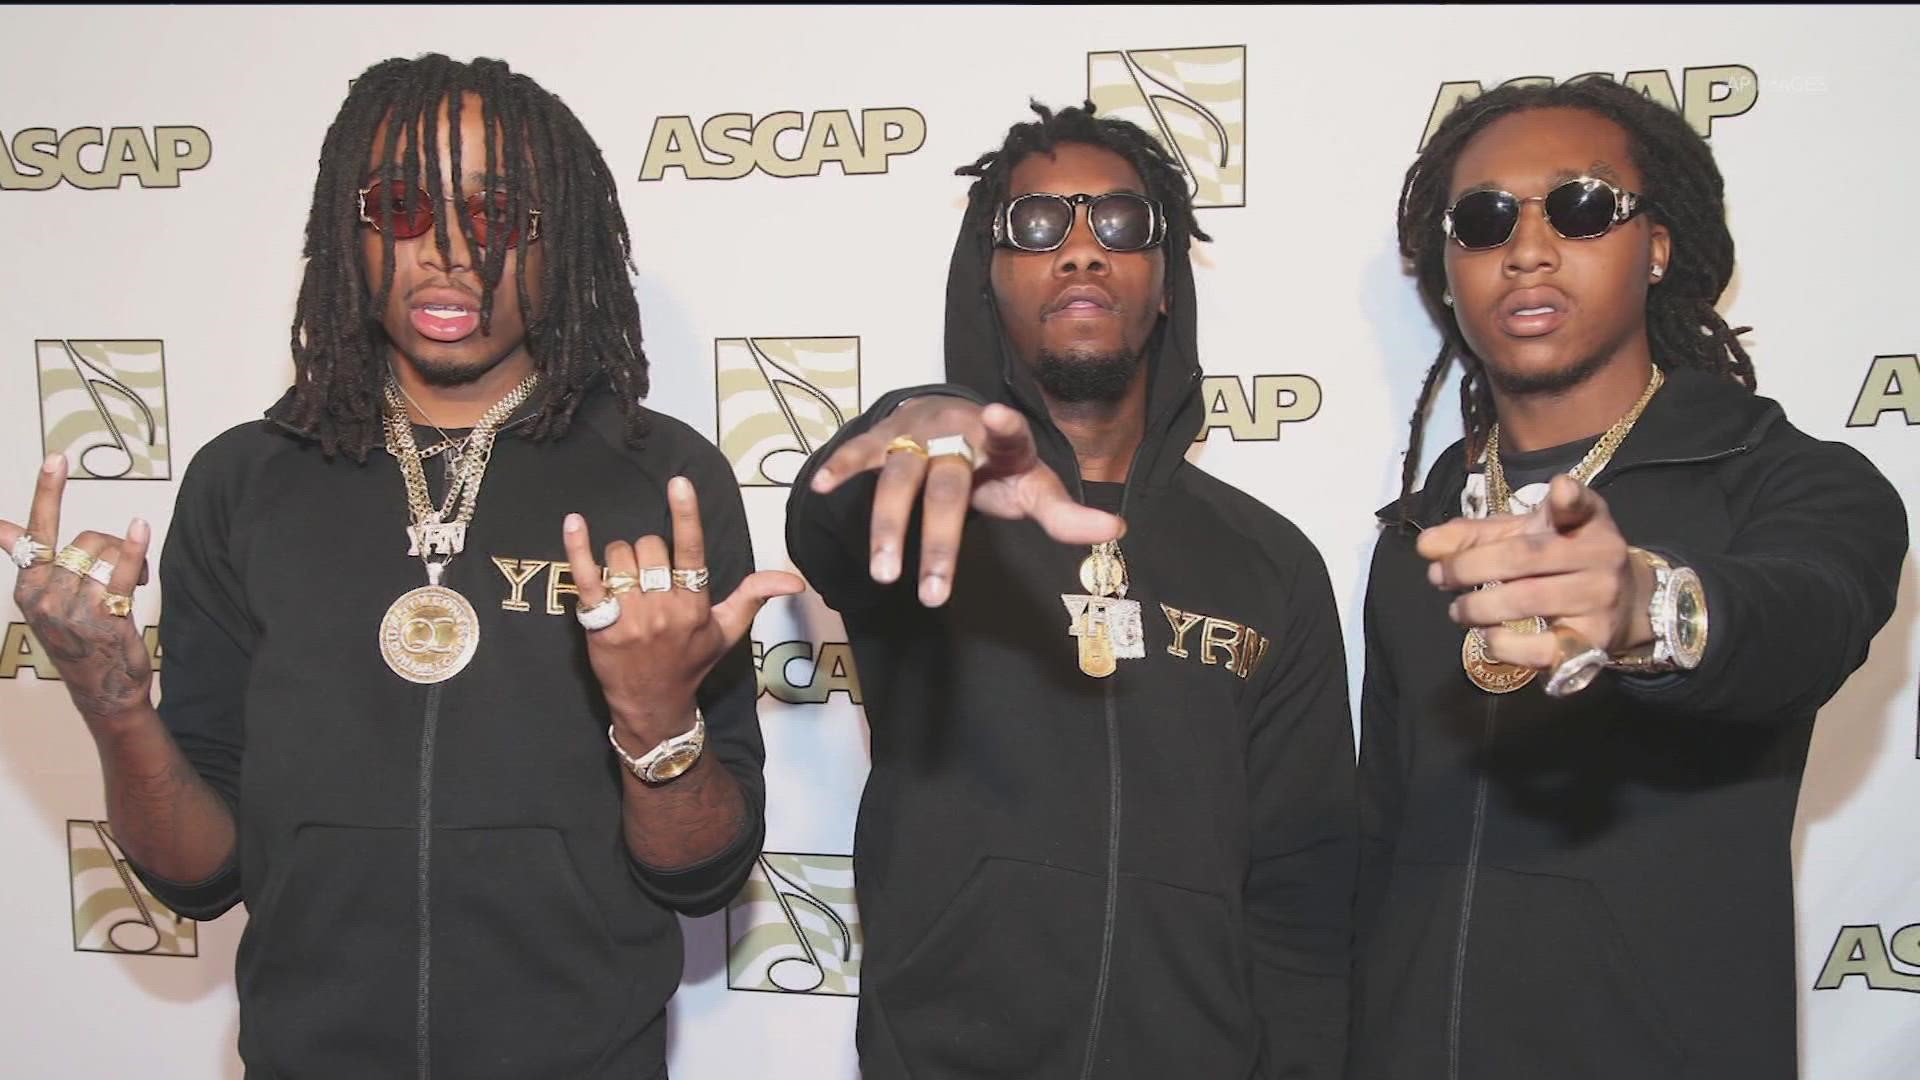 Fans took to social media to share their condolences and most fond memories of the Migos after TakeOff was shot and killed in Houston.